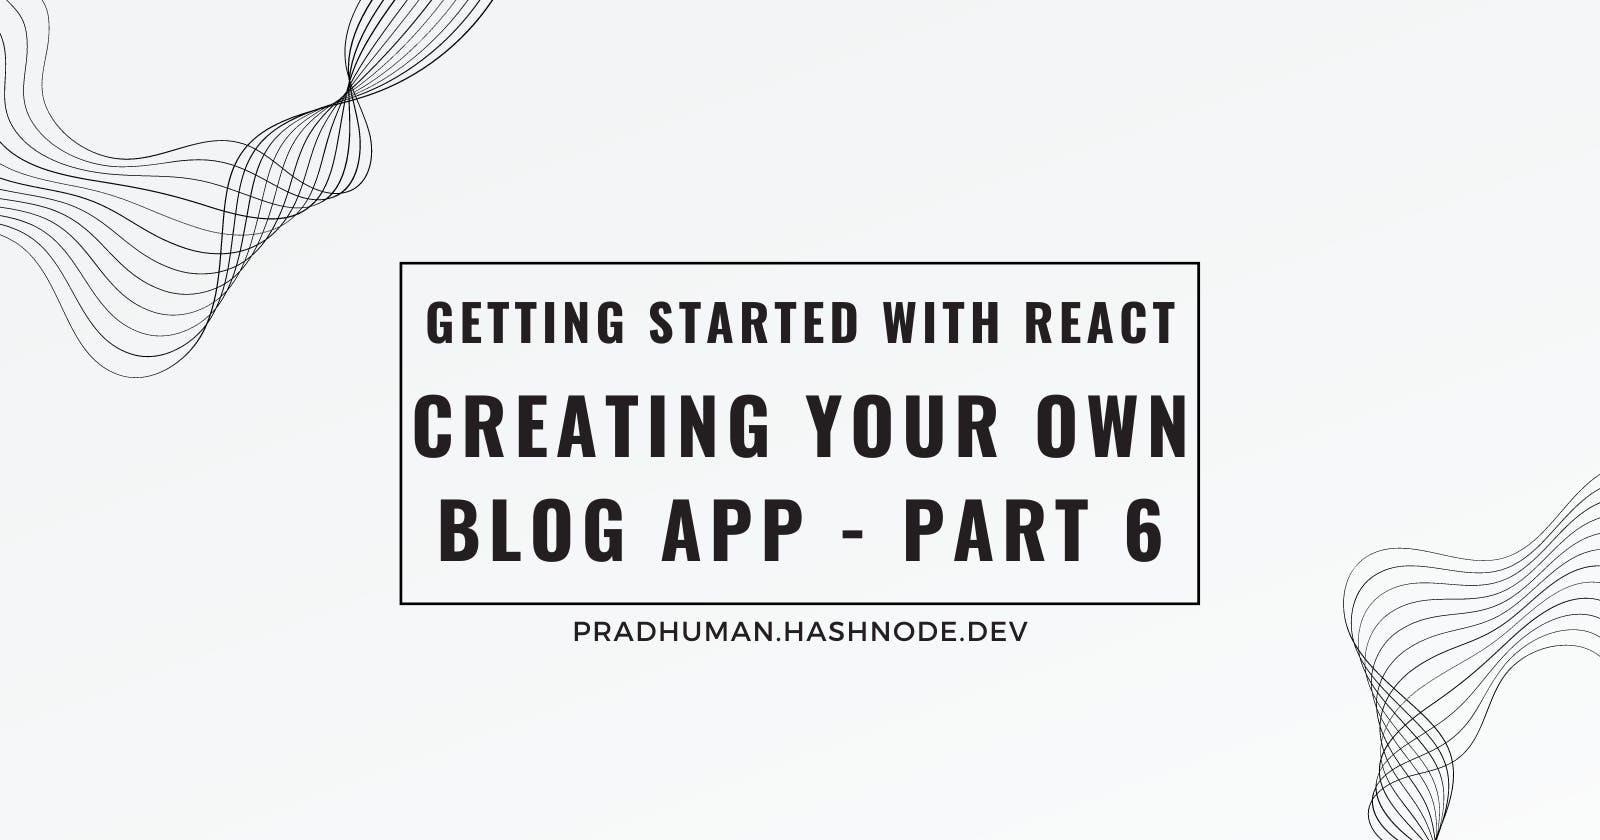 Getting Started with React: Creating Your Own Blog App - Part 6